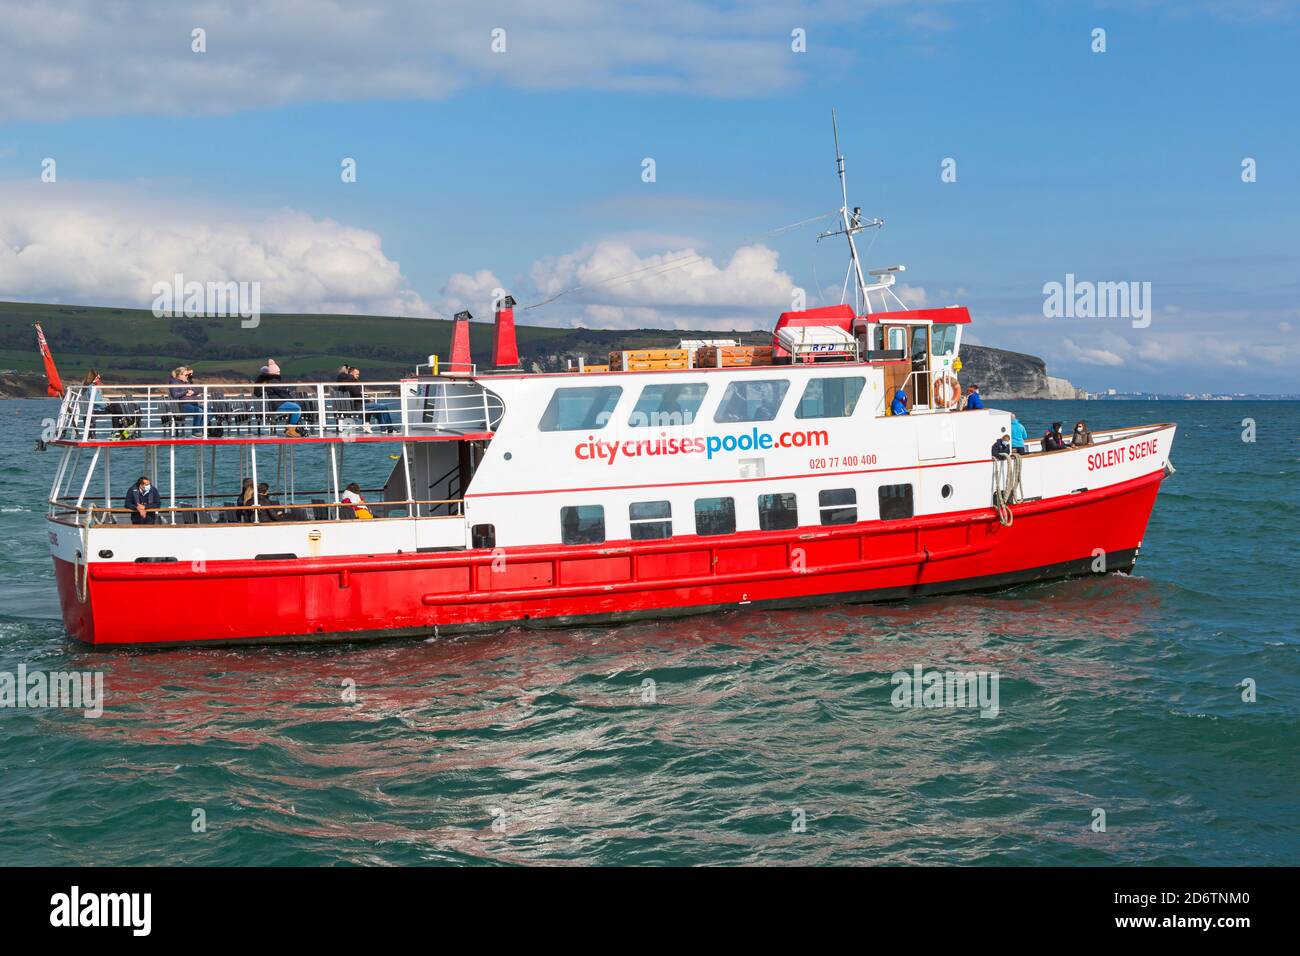 Passengers enjoy a trip along the coastline and around the bay on the Solent Scene boat arriving in Swanage, Dorset UK in October Stock Photo